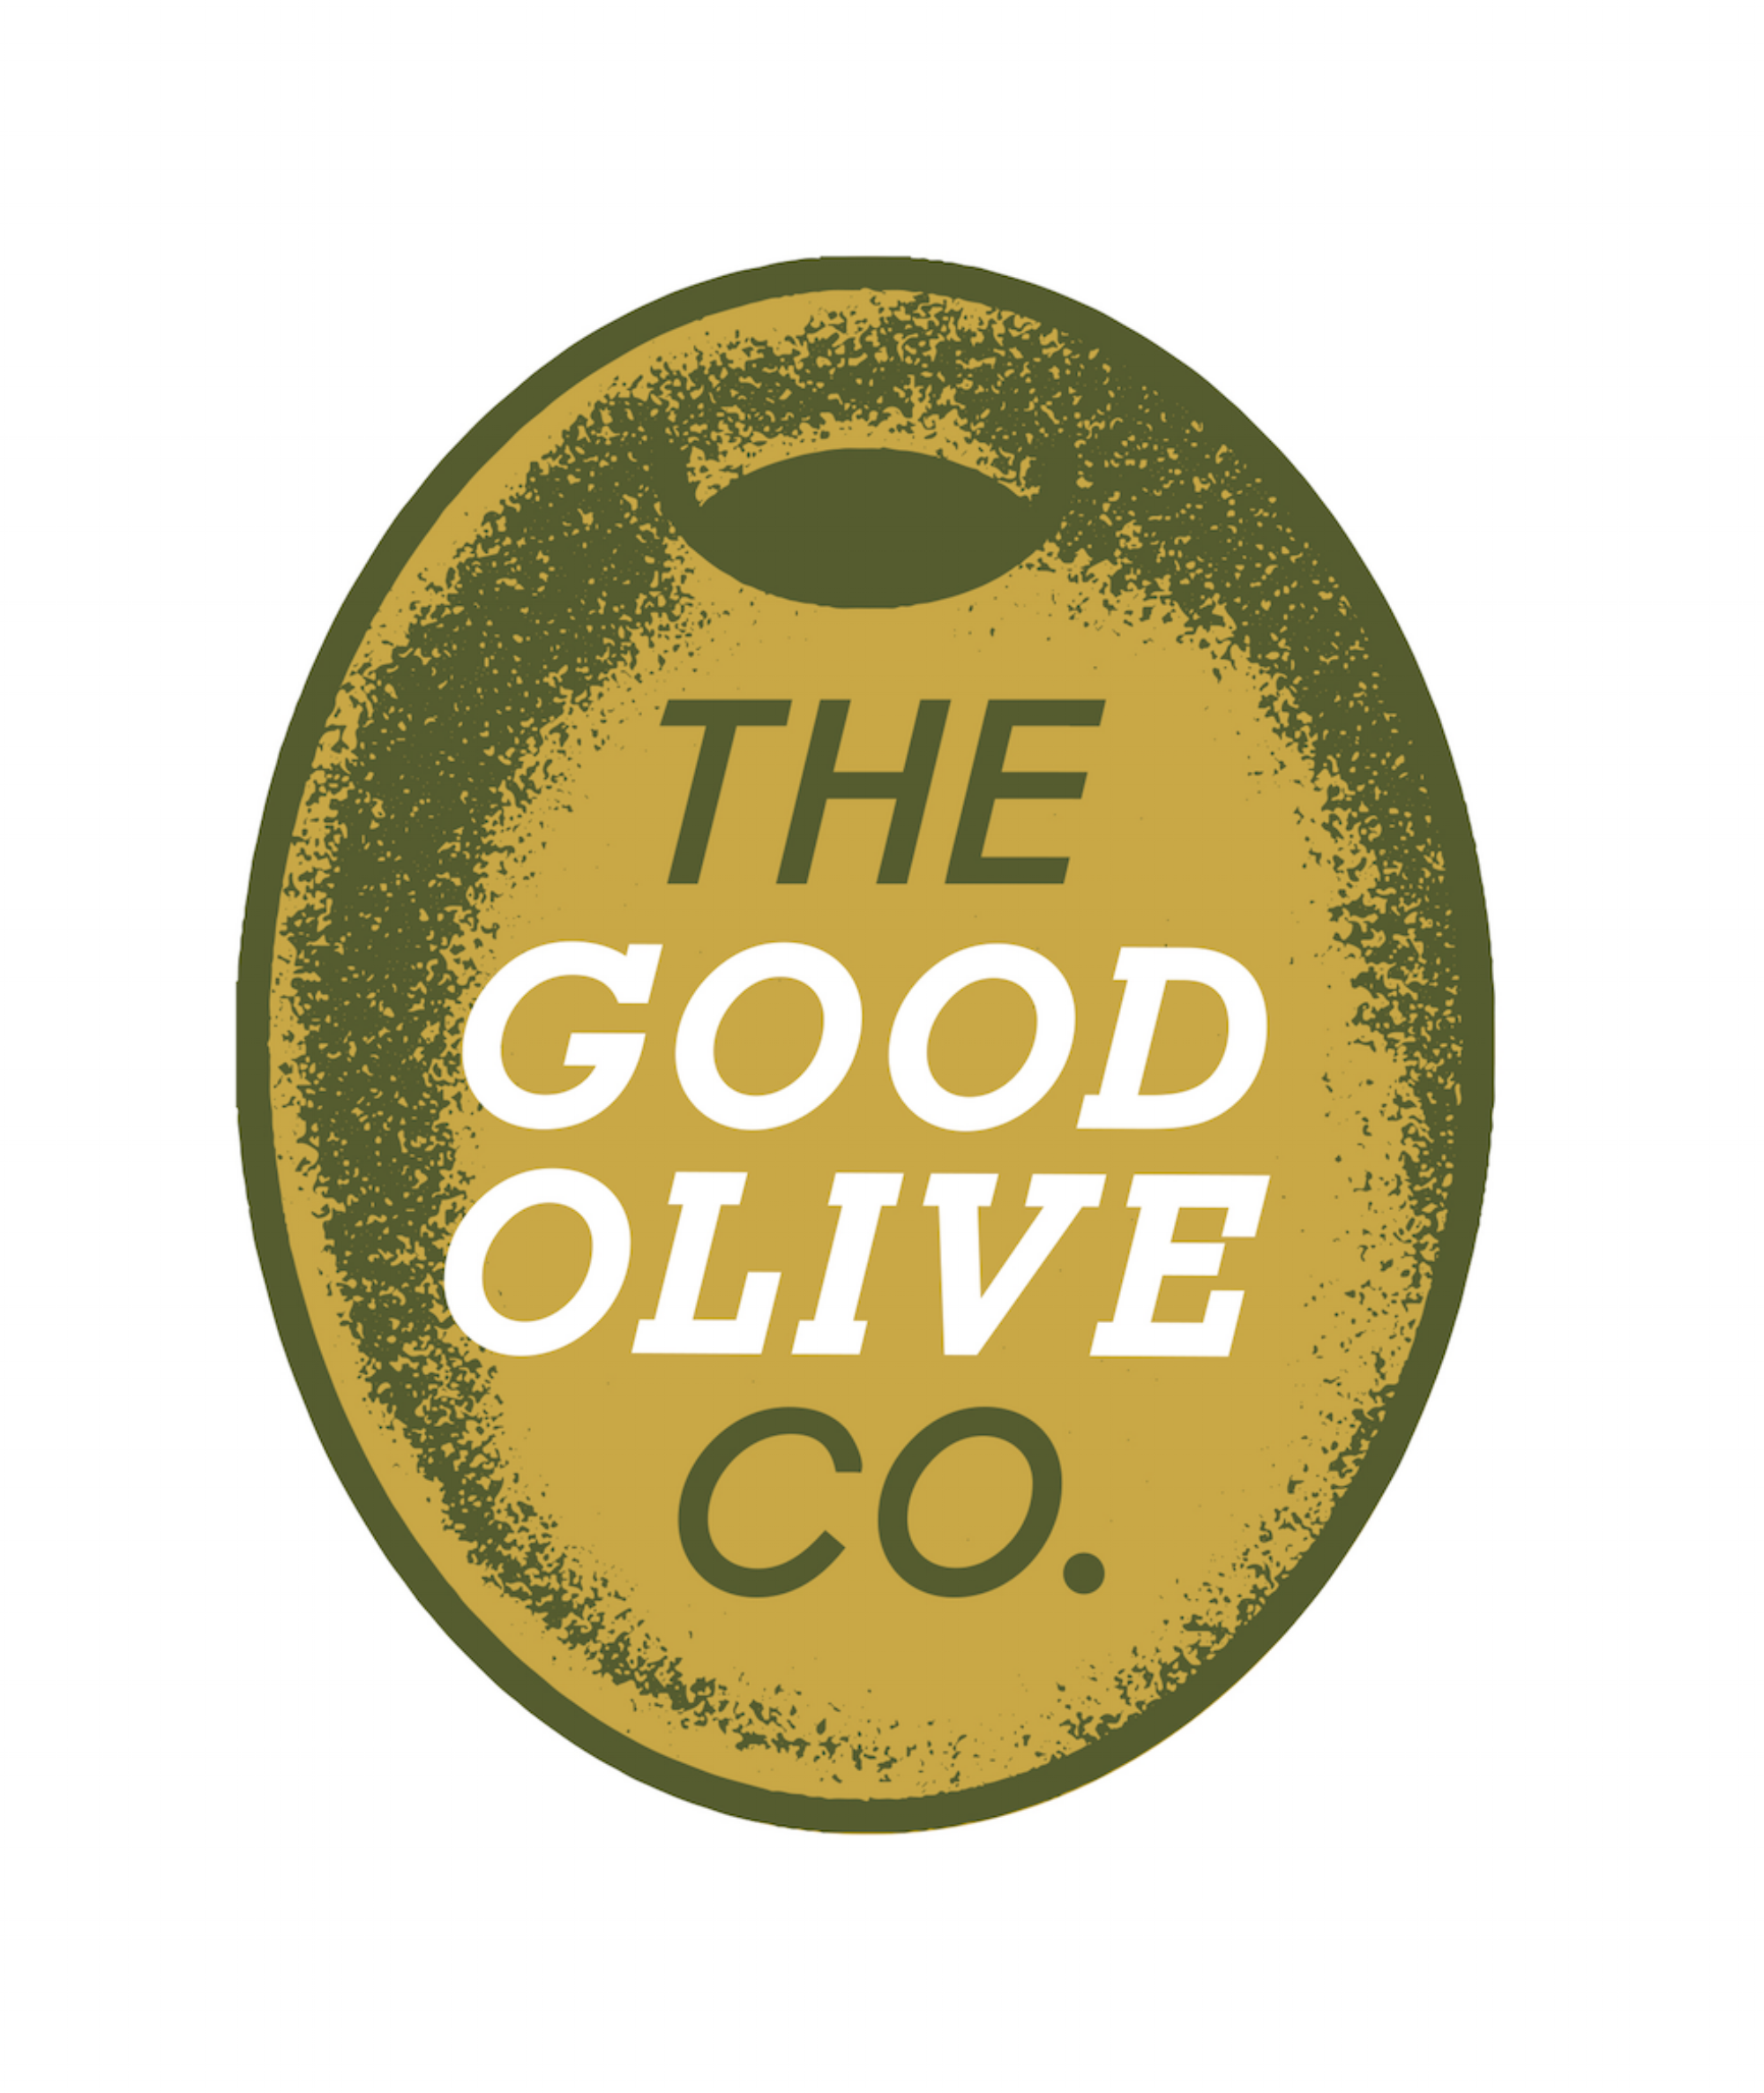 The Good Olive Co.